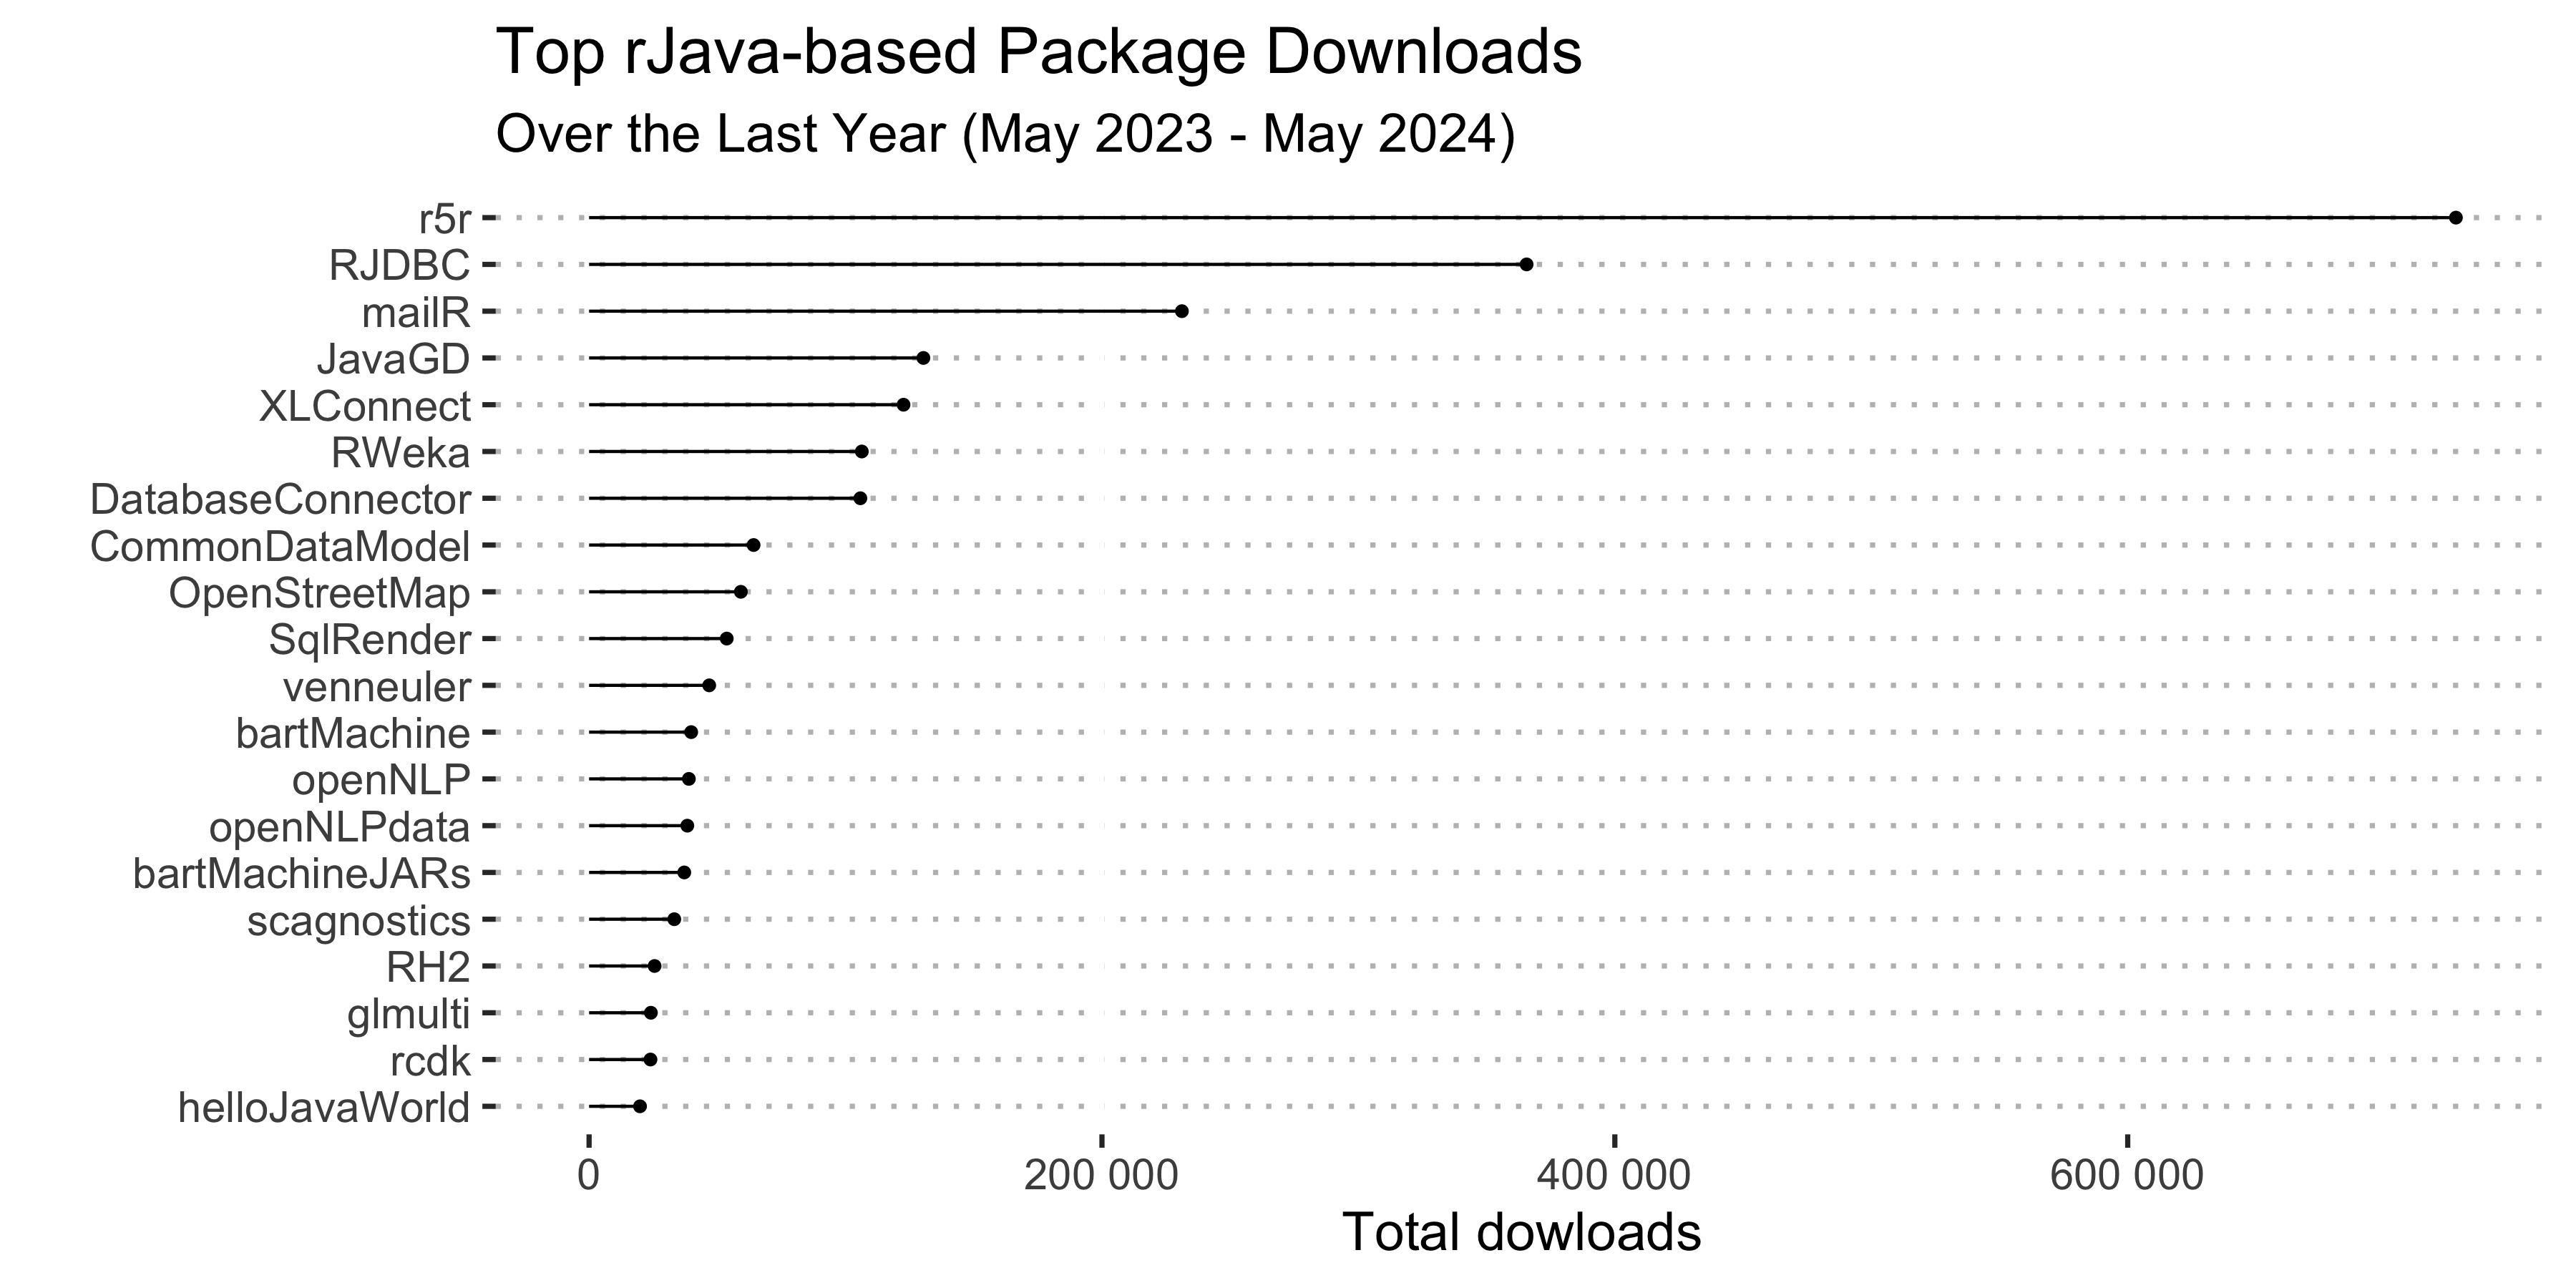 CRAN Downloads for top 20 rJava-dependent Packages over 1 year